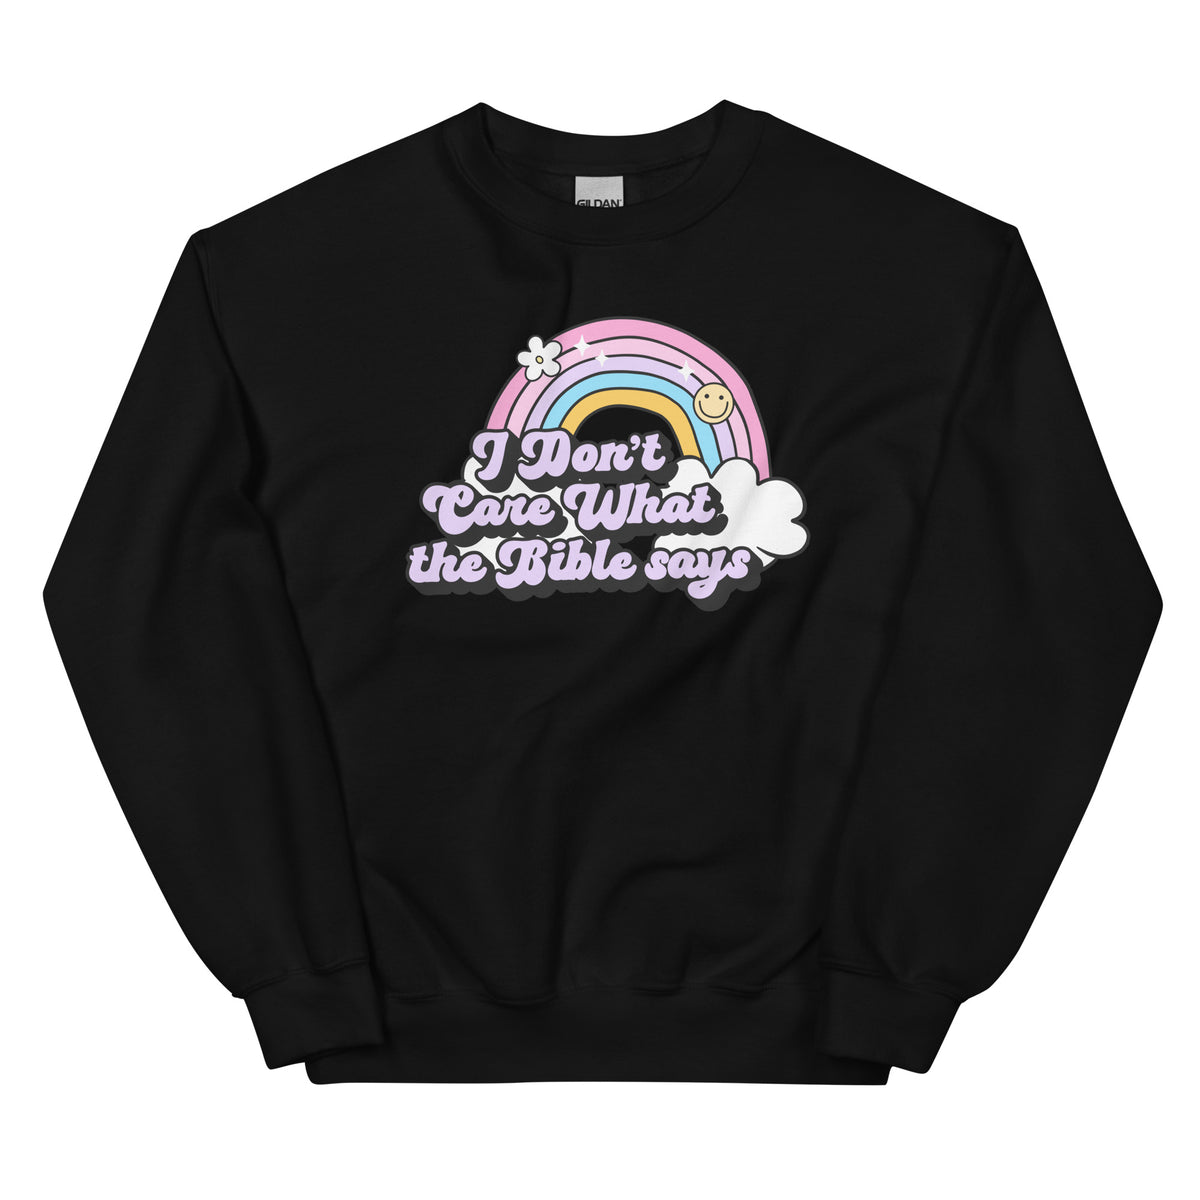 I Don't Care What the Bible Says Sweatshirt